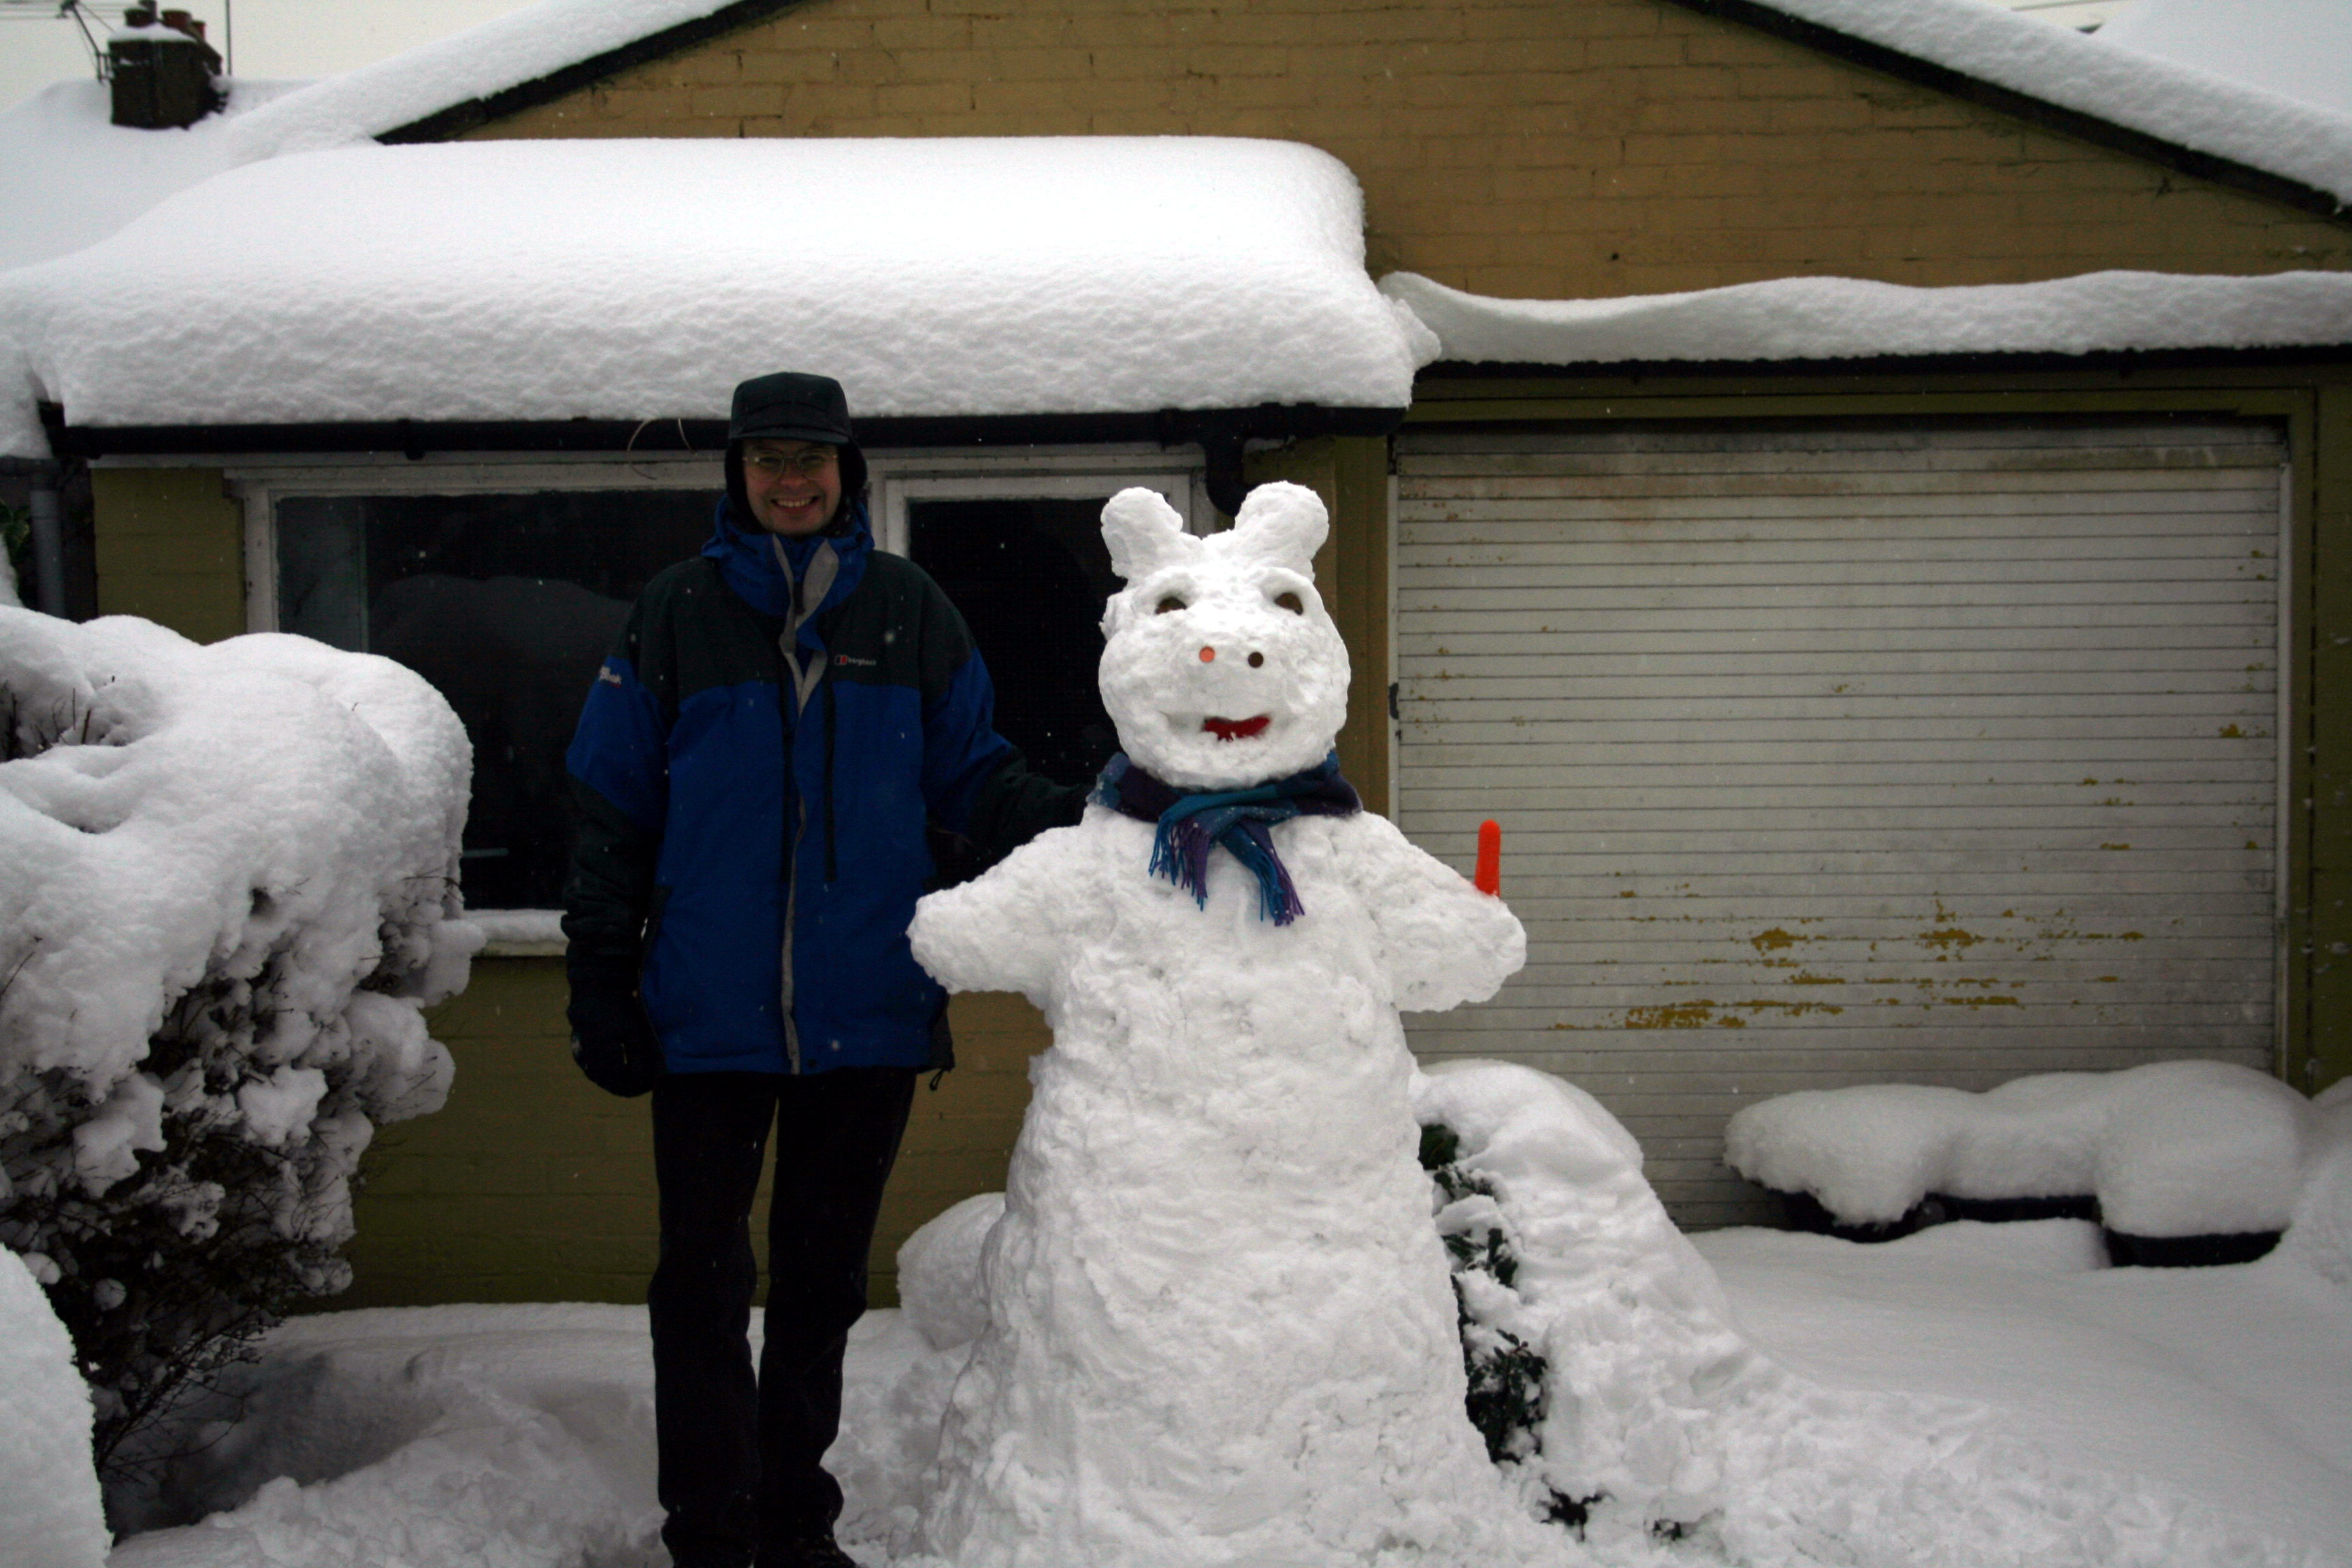 Edward with the snowbear